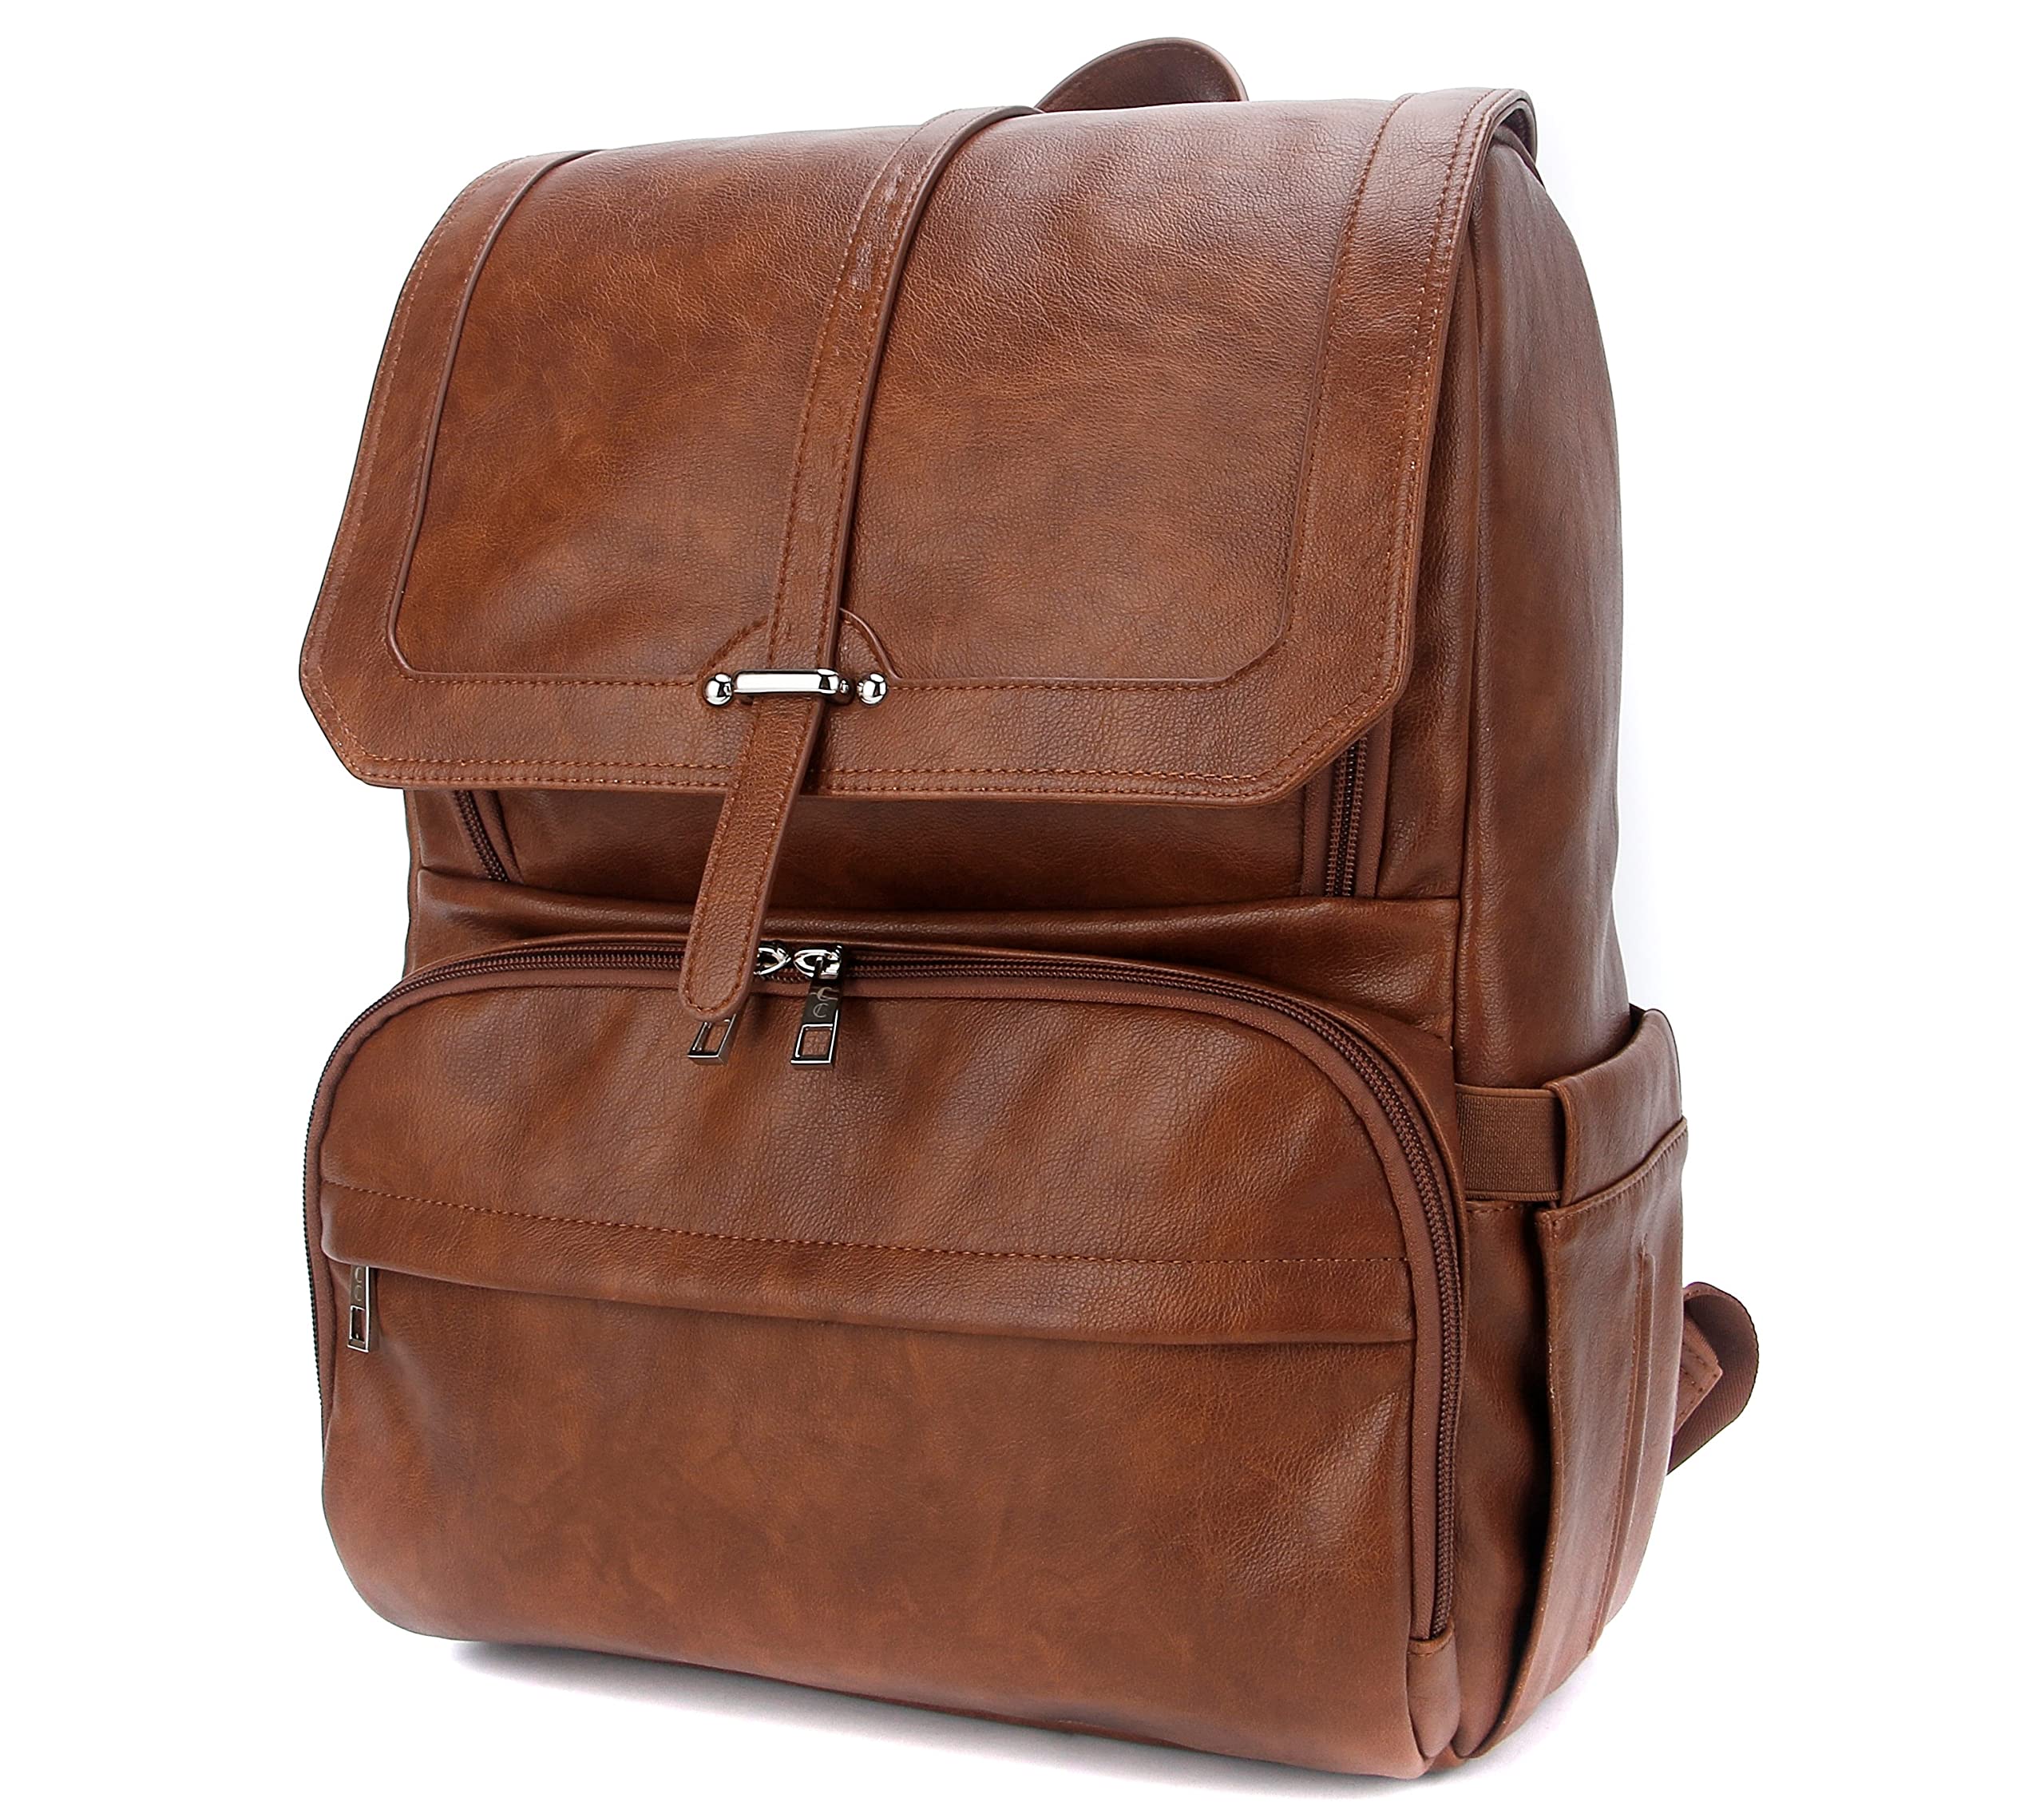 cc citi collective citi collective Navigator Saddle Brown Diaper Bag Backpack -Premium Vegan Leather- compact Spacious Design With Insulated Pocket